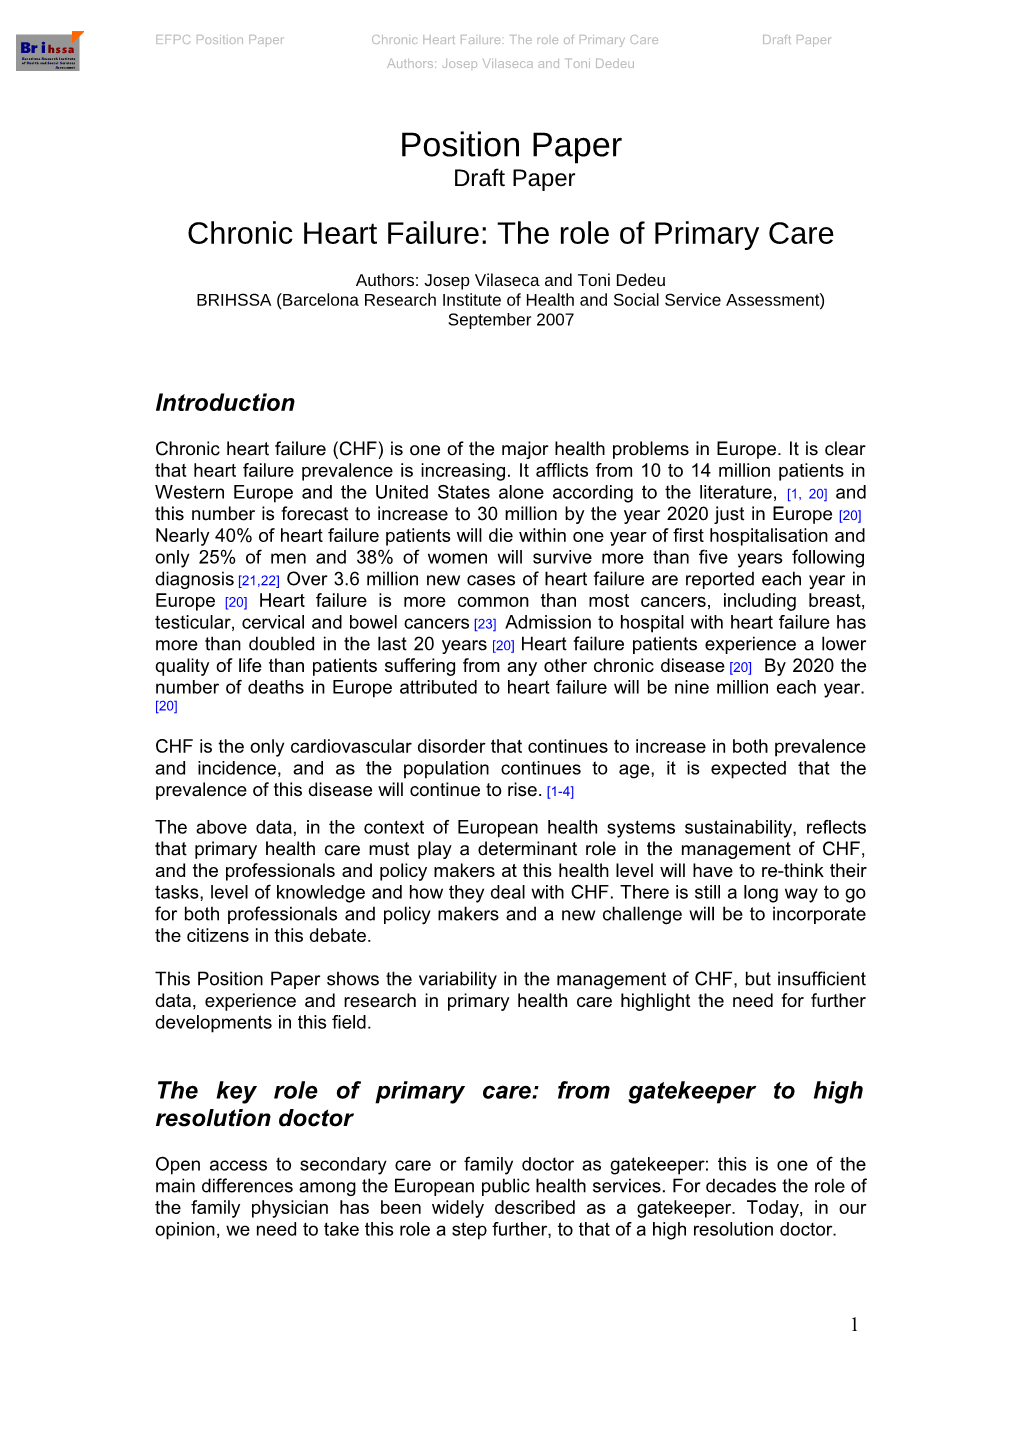 EFPC Position Paper Chronic Heart Failure: the Role of Primary Caredraft Paper